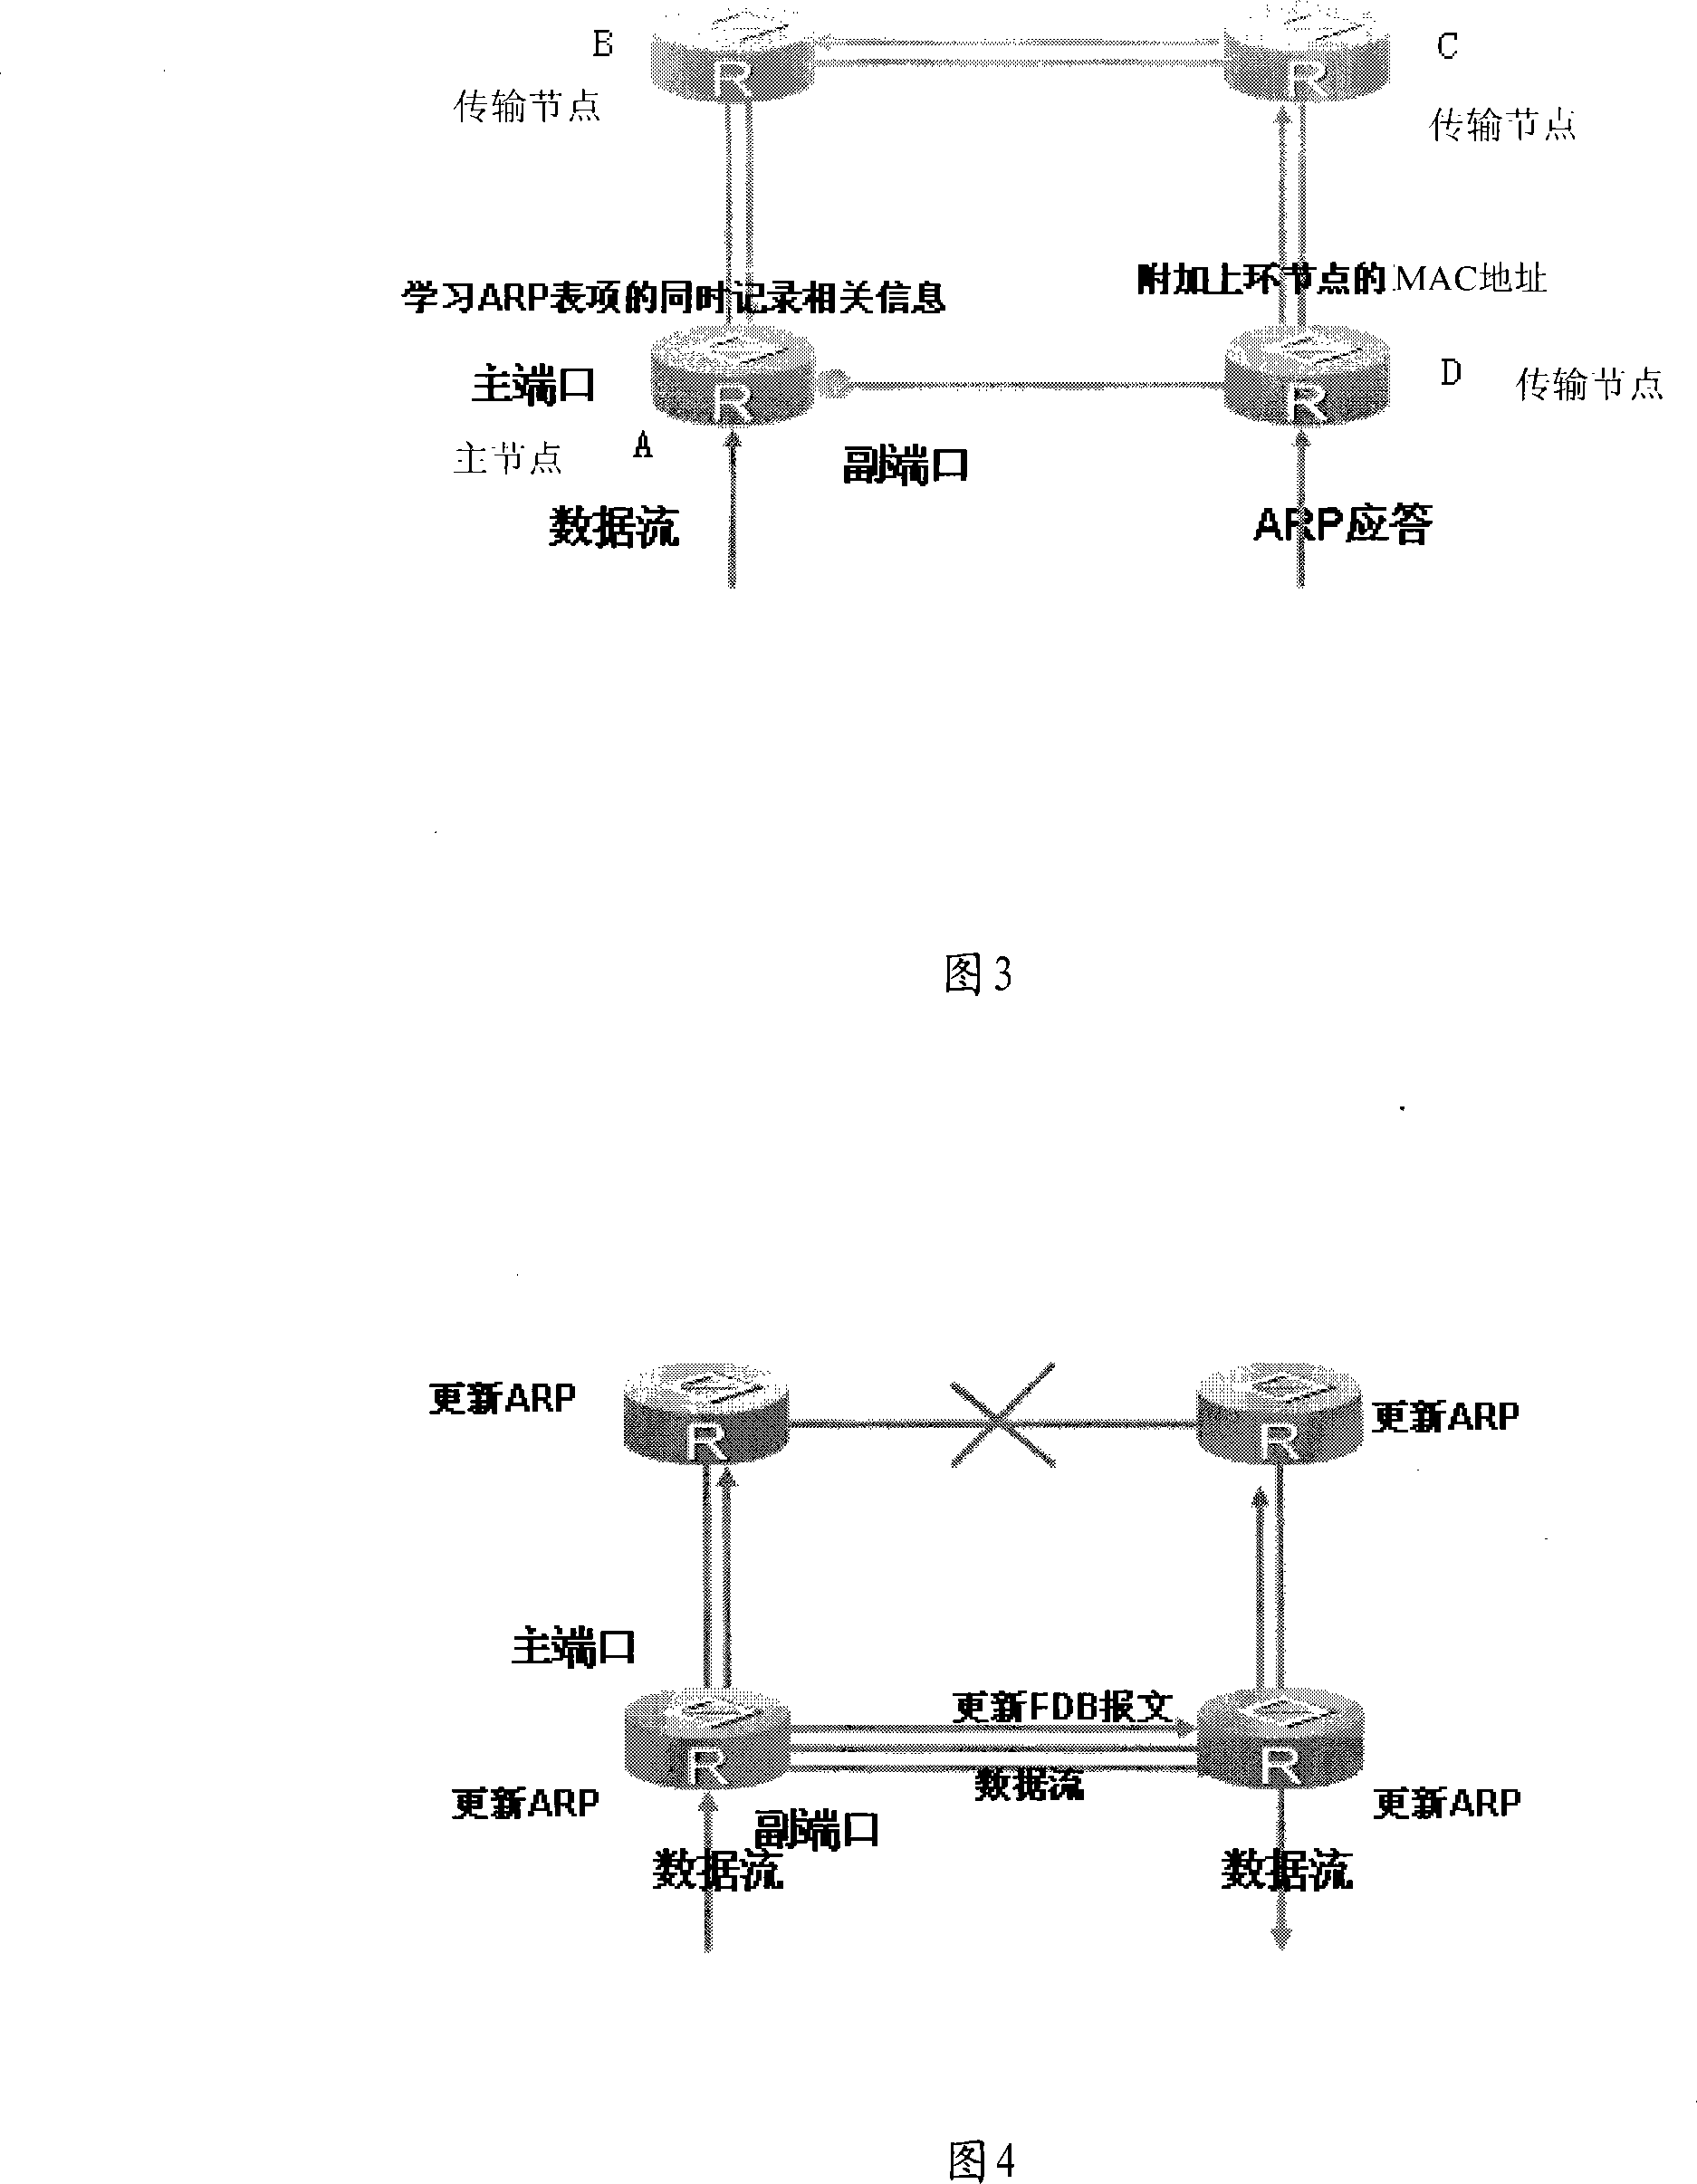 Method and apparatus for switching traffic of looped network